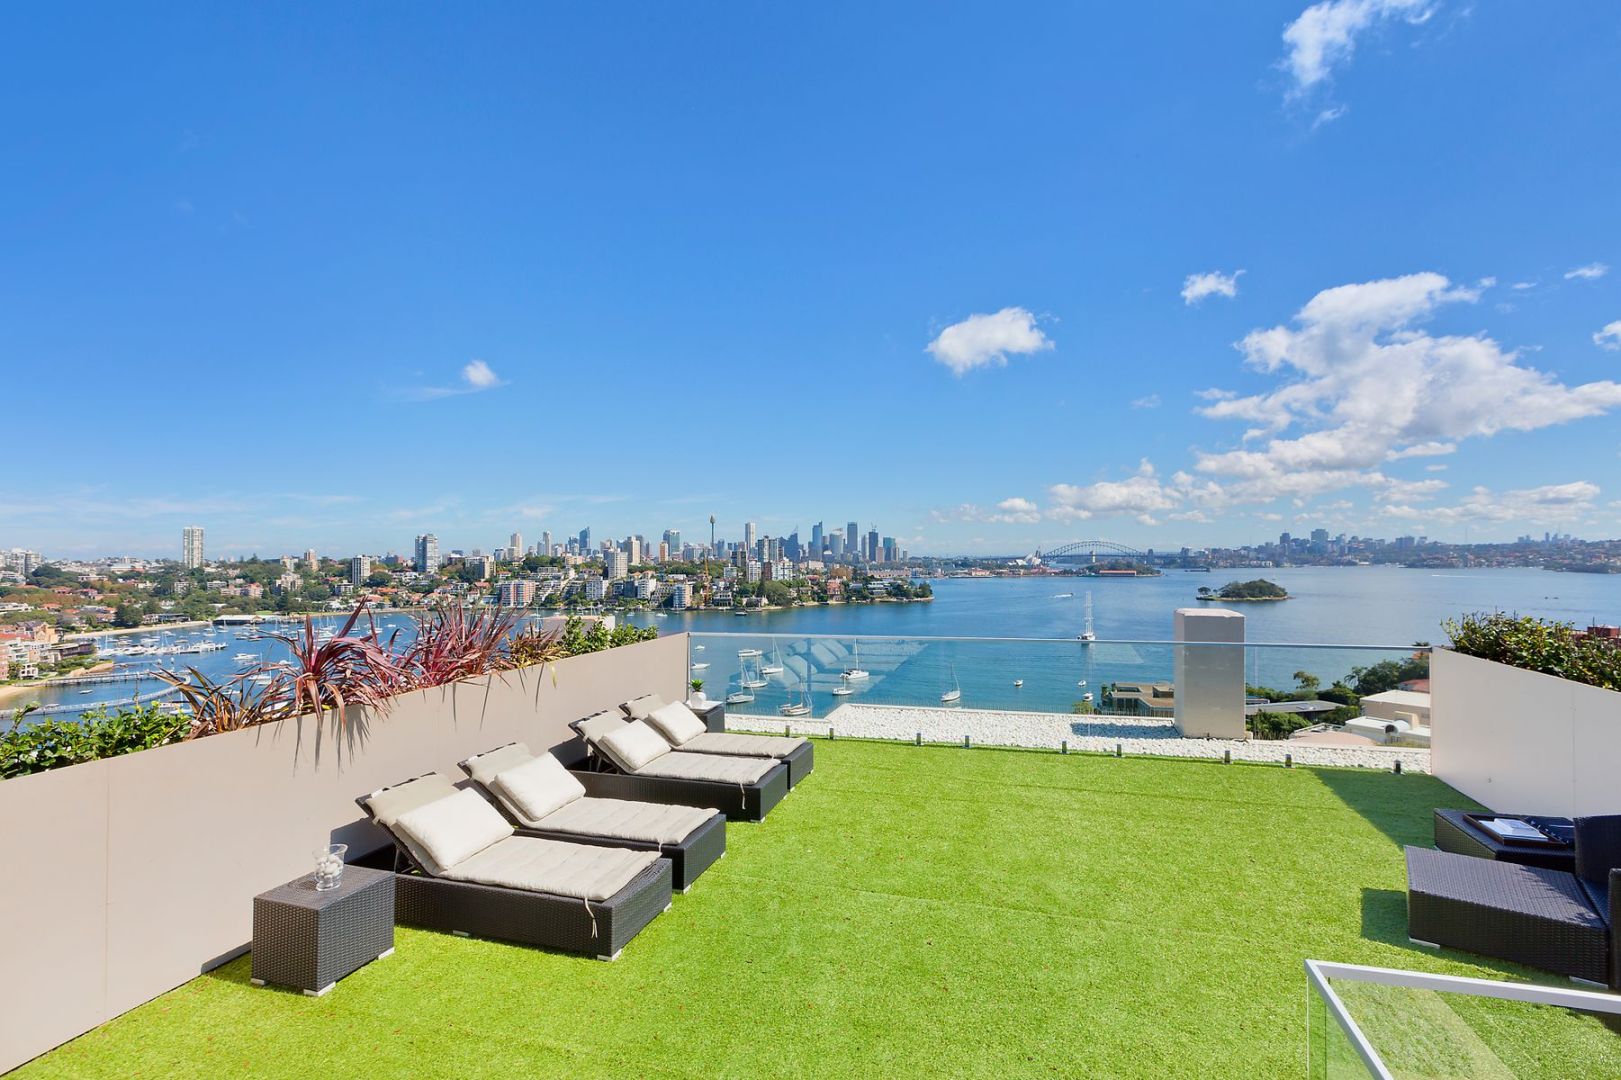 On The Market: This $9 Million Point Piper Penthouse With 360 Degree Harbour Views